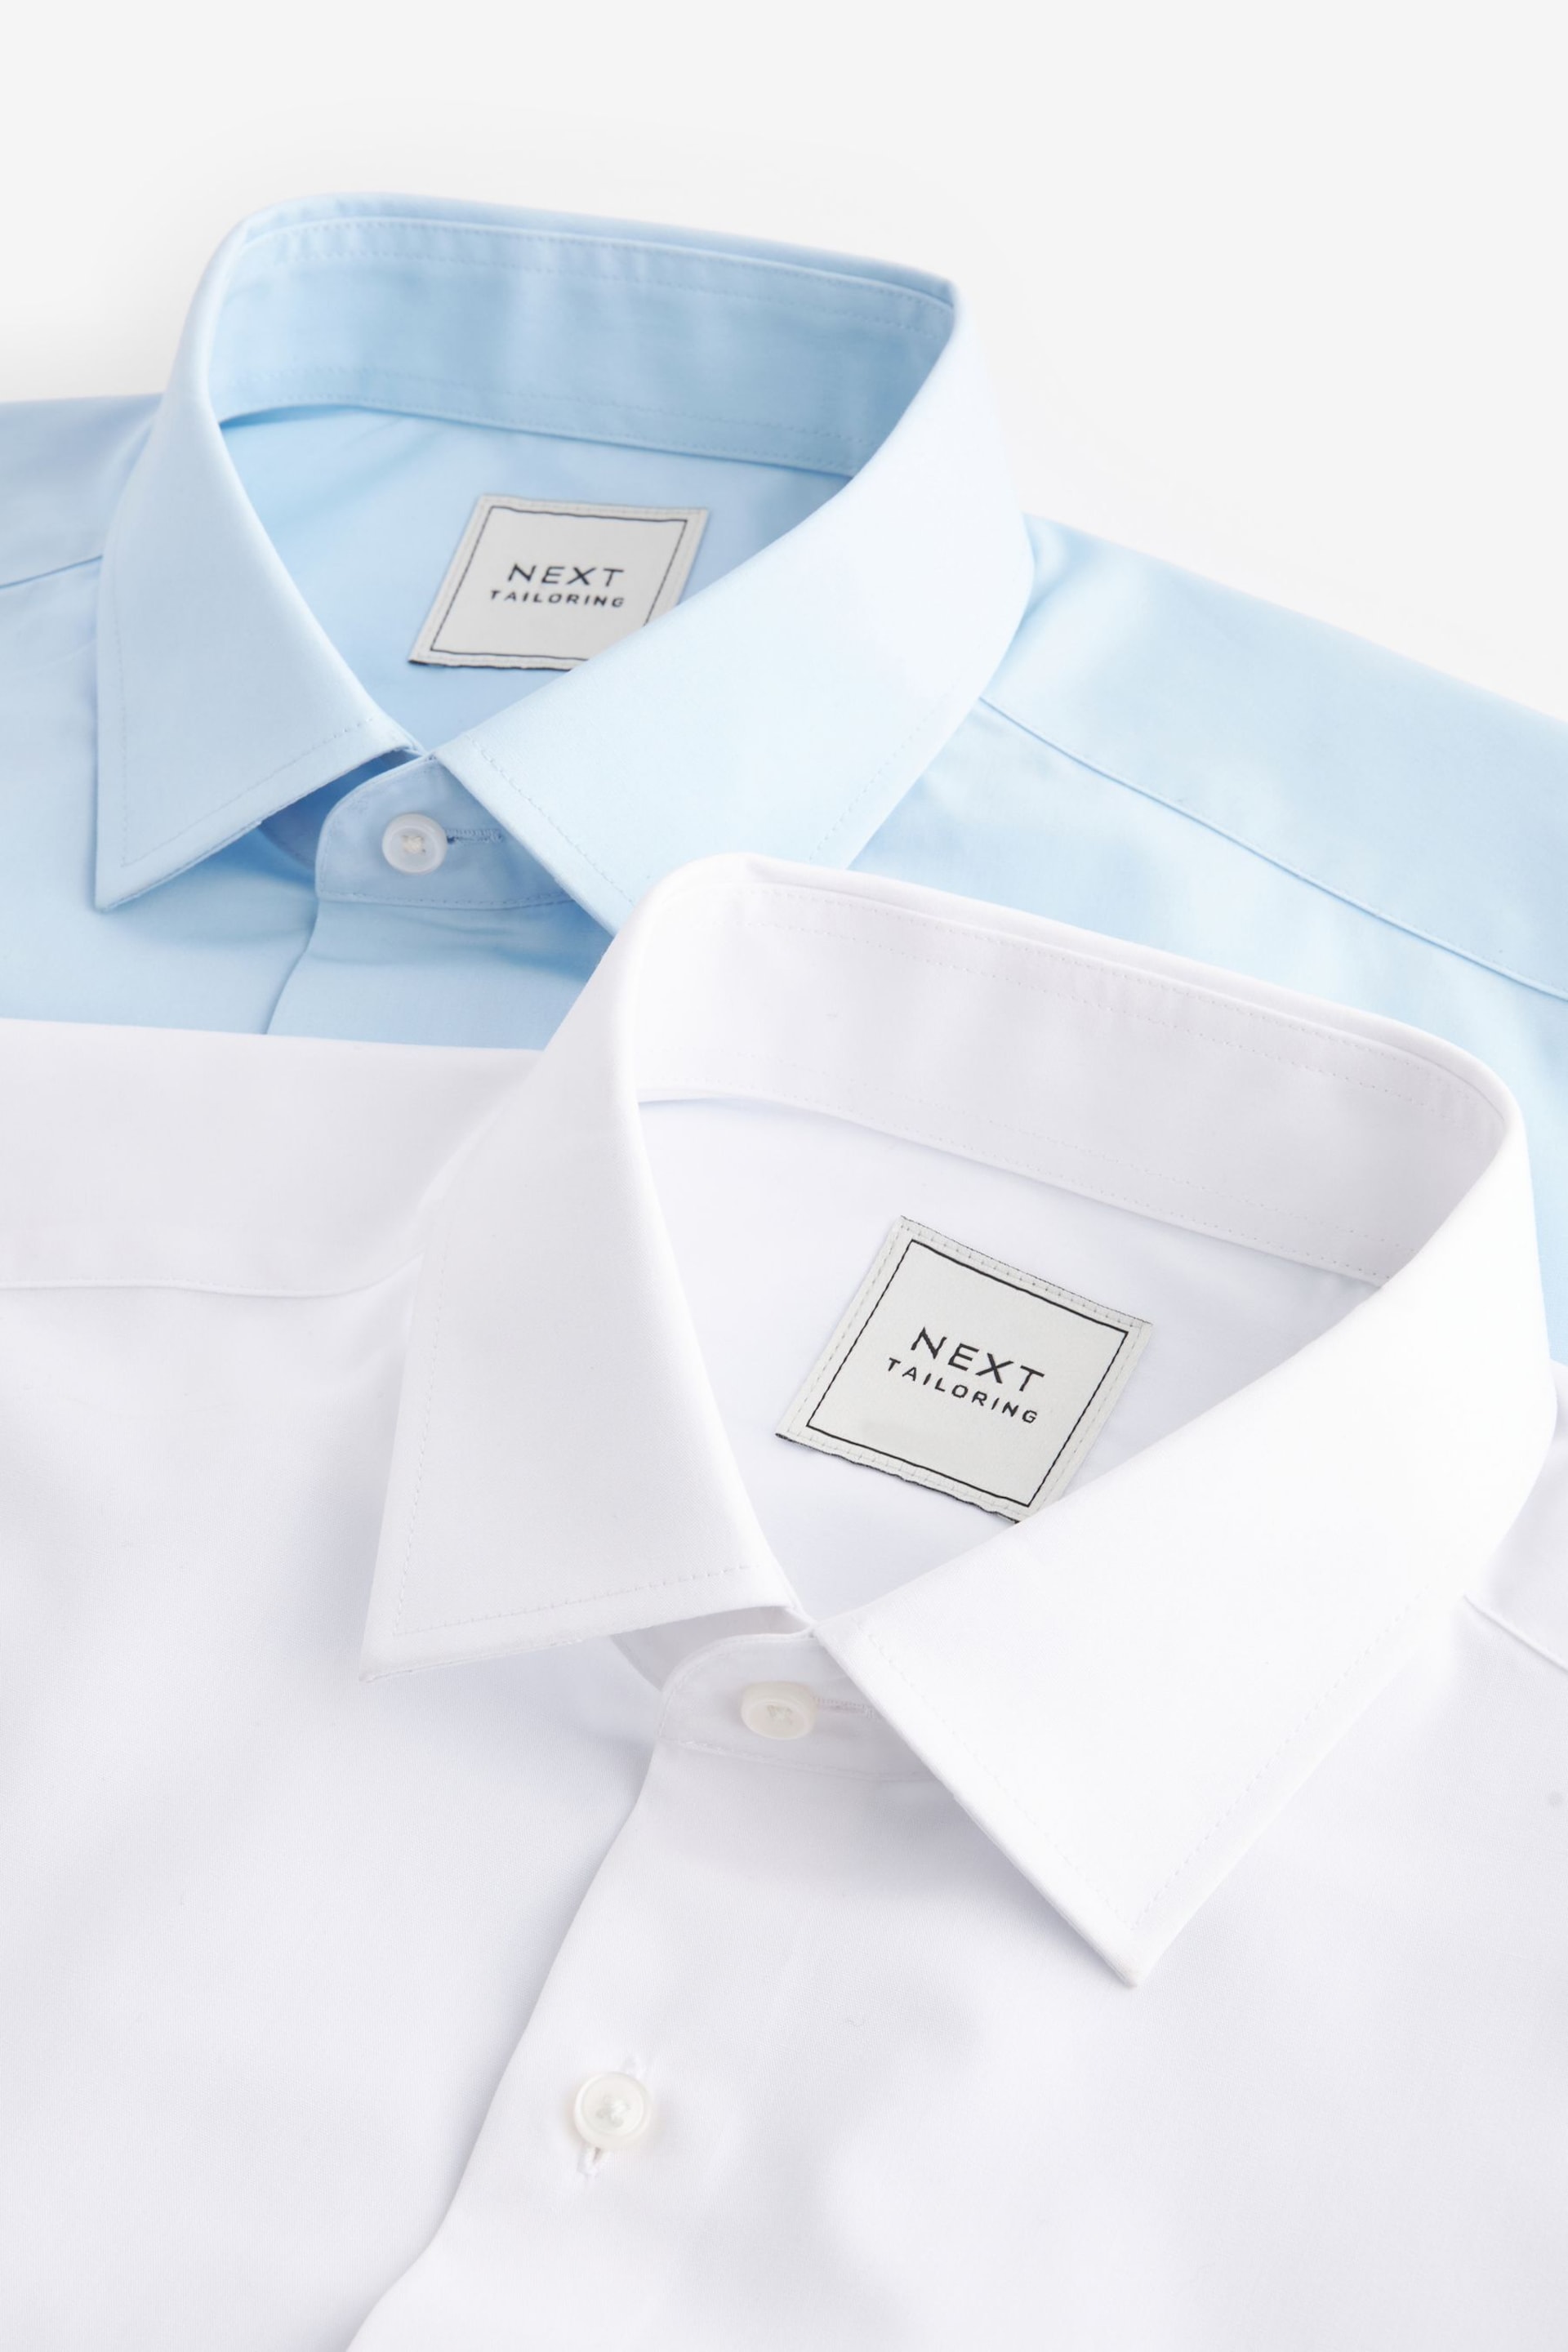 White/Blue Slim Fit Single Cuff Easy Care Shirts 2 Pack - Image 10 of 11